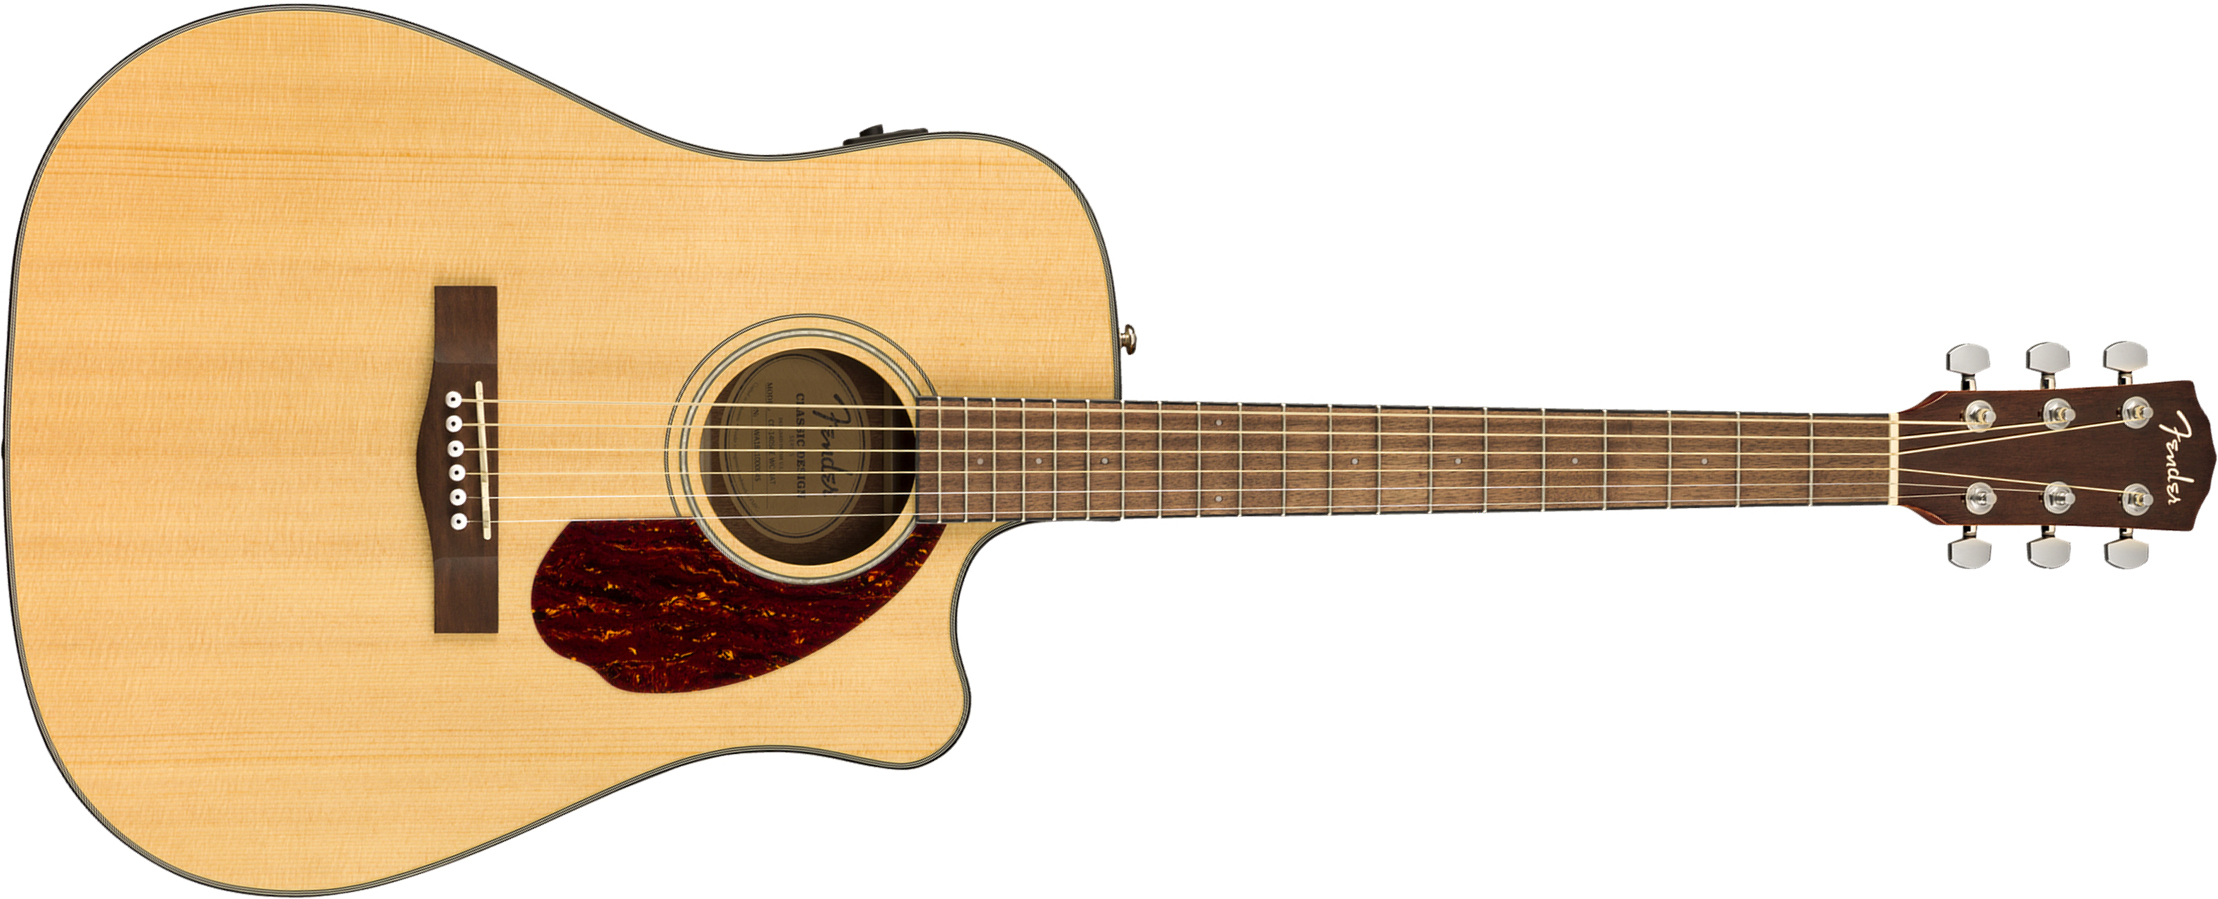 Fender Cd-140sce Classic Design Dreadnought Cw Epicea Ovangkol Wal +etui - Natural - Electro acoustic guitar - Main picture